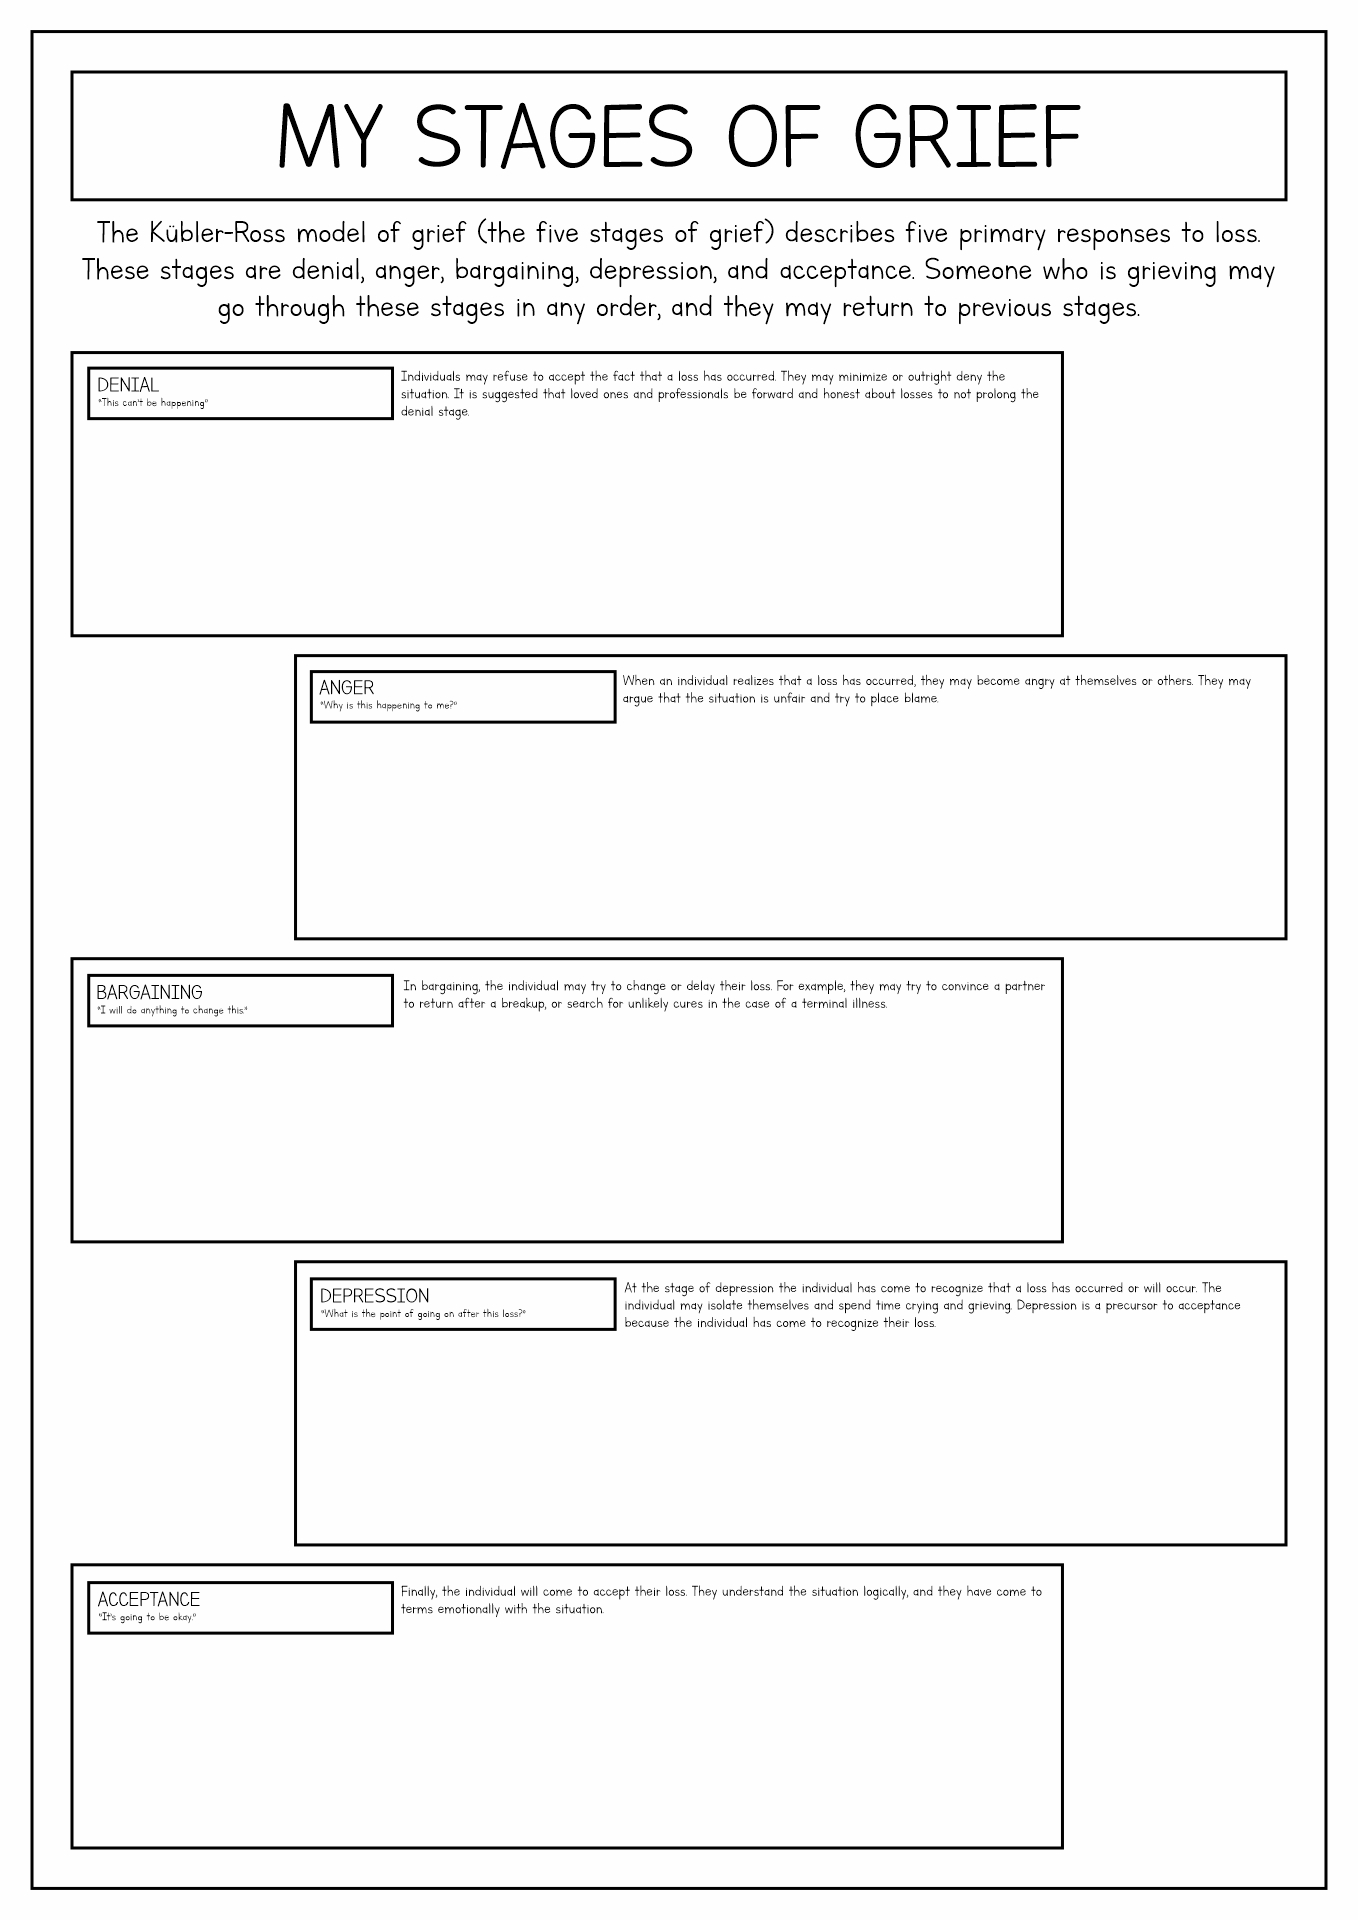 15-best-images-of-grief-therapy-worksheets-free-grief-worksheets-for